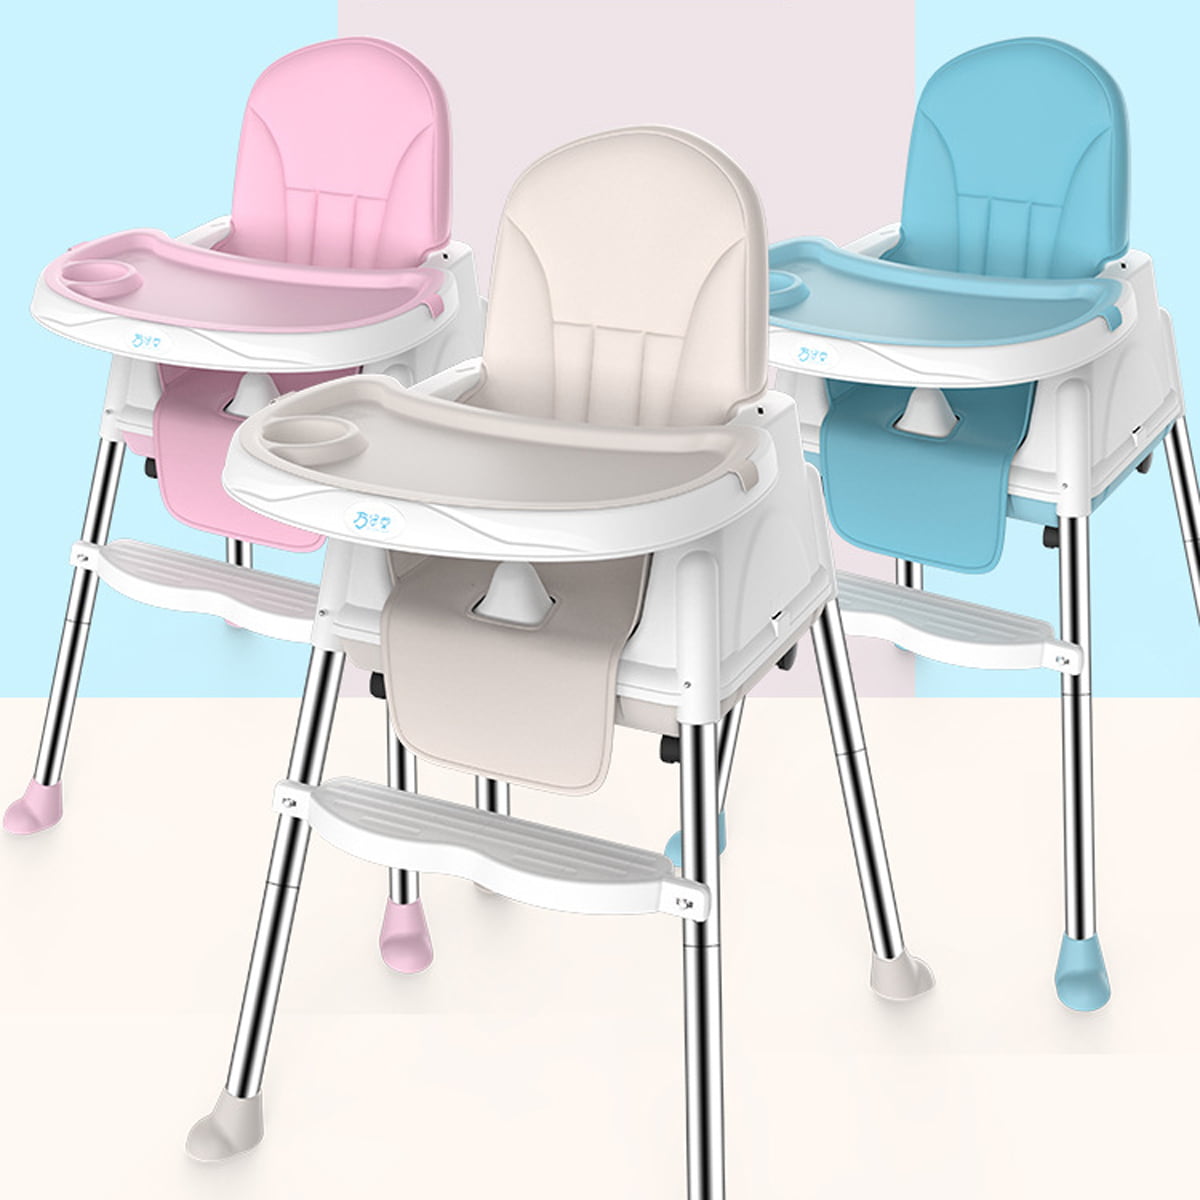 PEALO Portable Kids Dining Chair Baby Booster Chair Multi Function Height Adjustable Snack Booster Baby Table Seat Outdoor with Cushion For Home Travel Camping